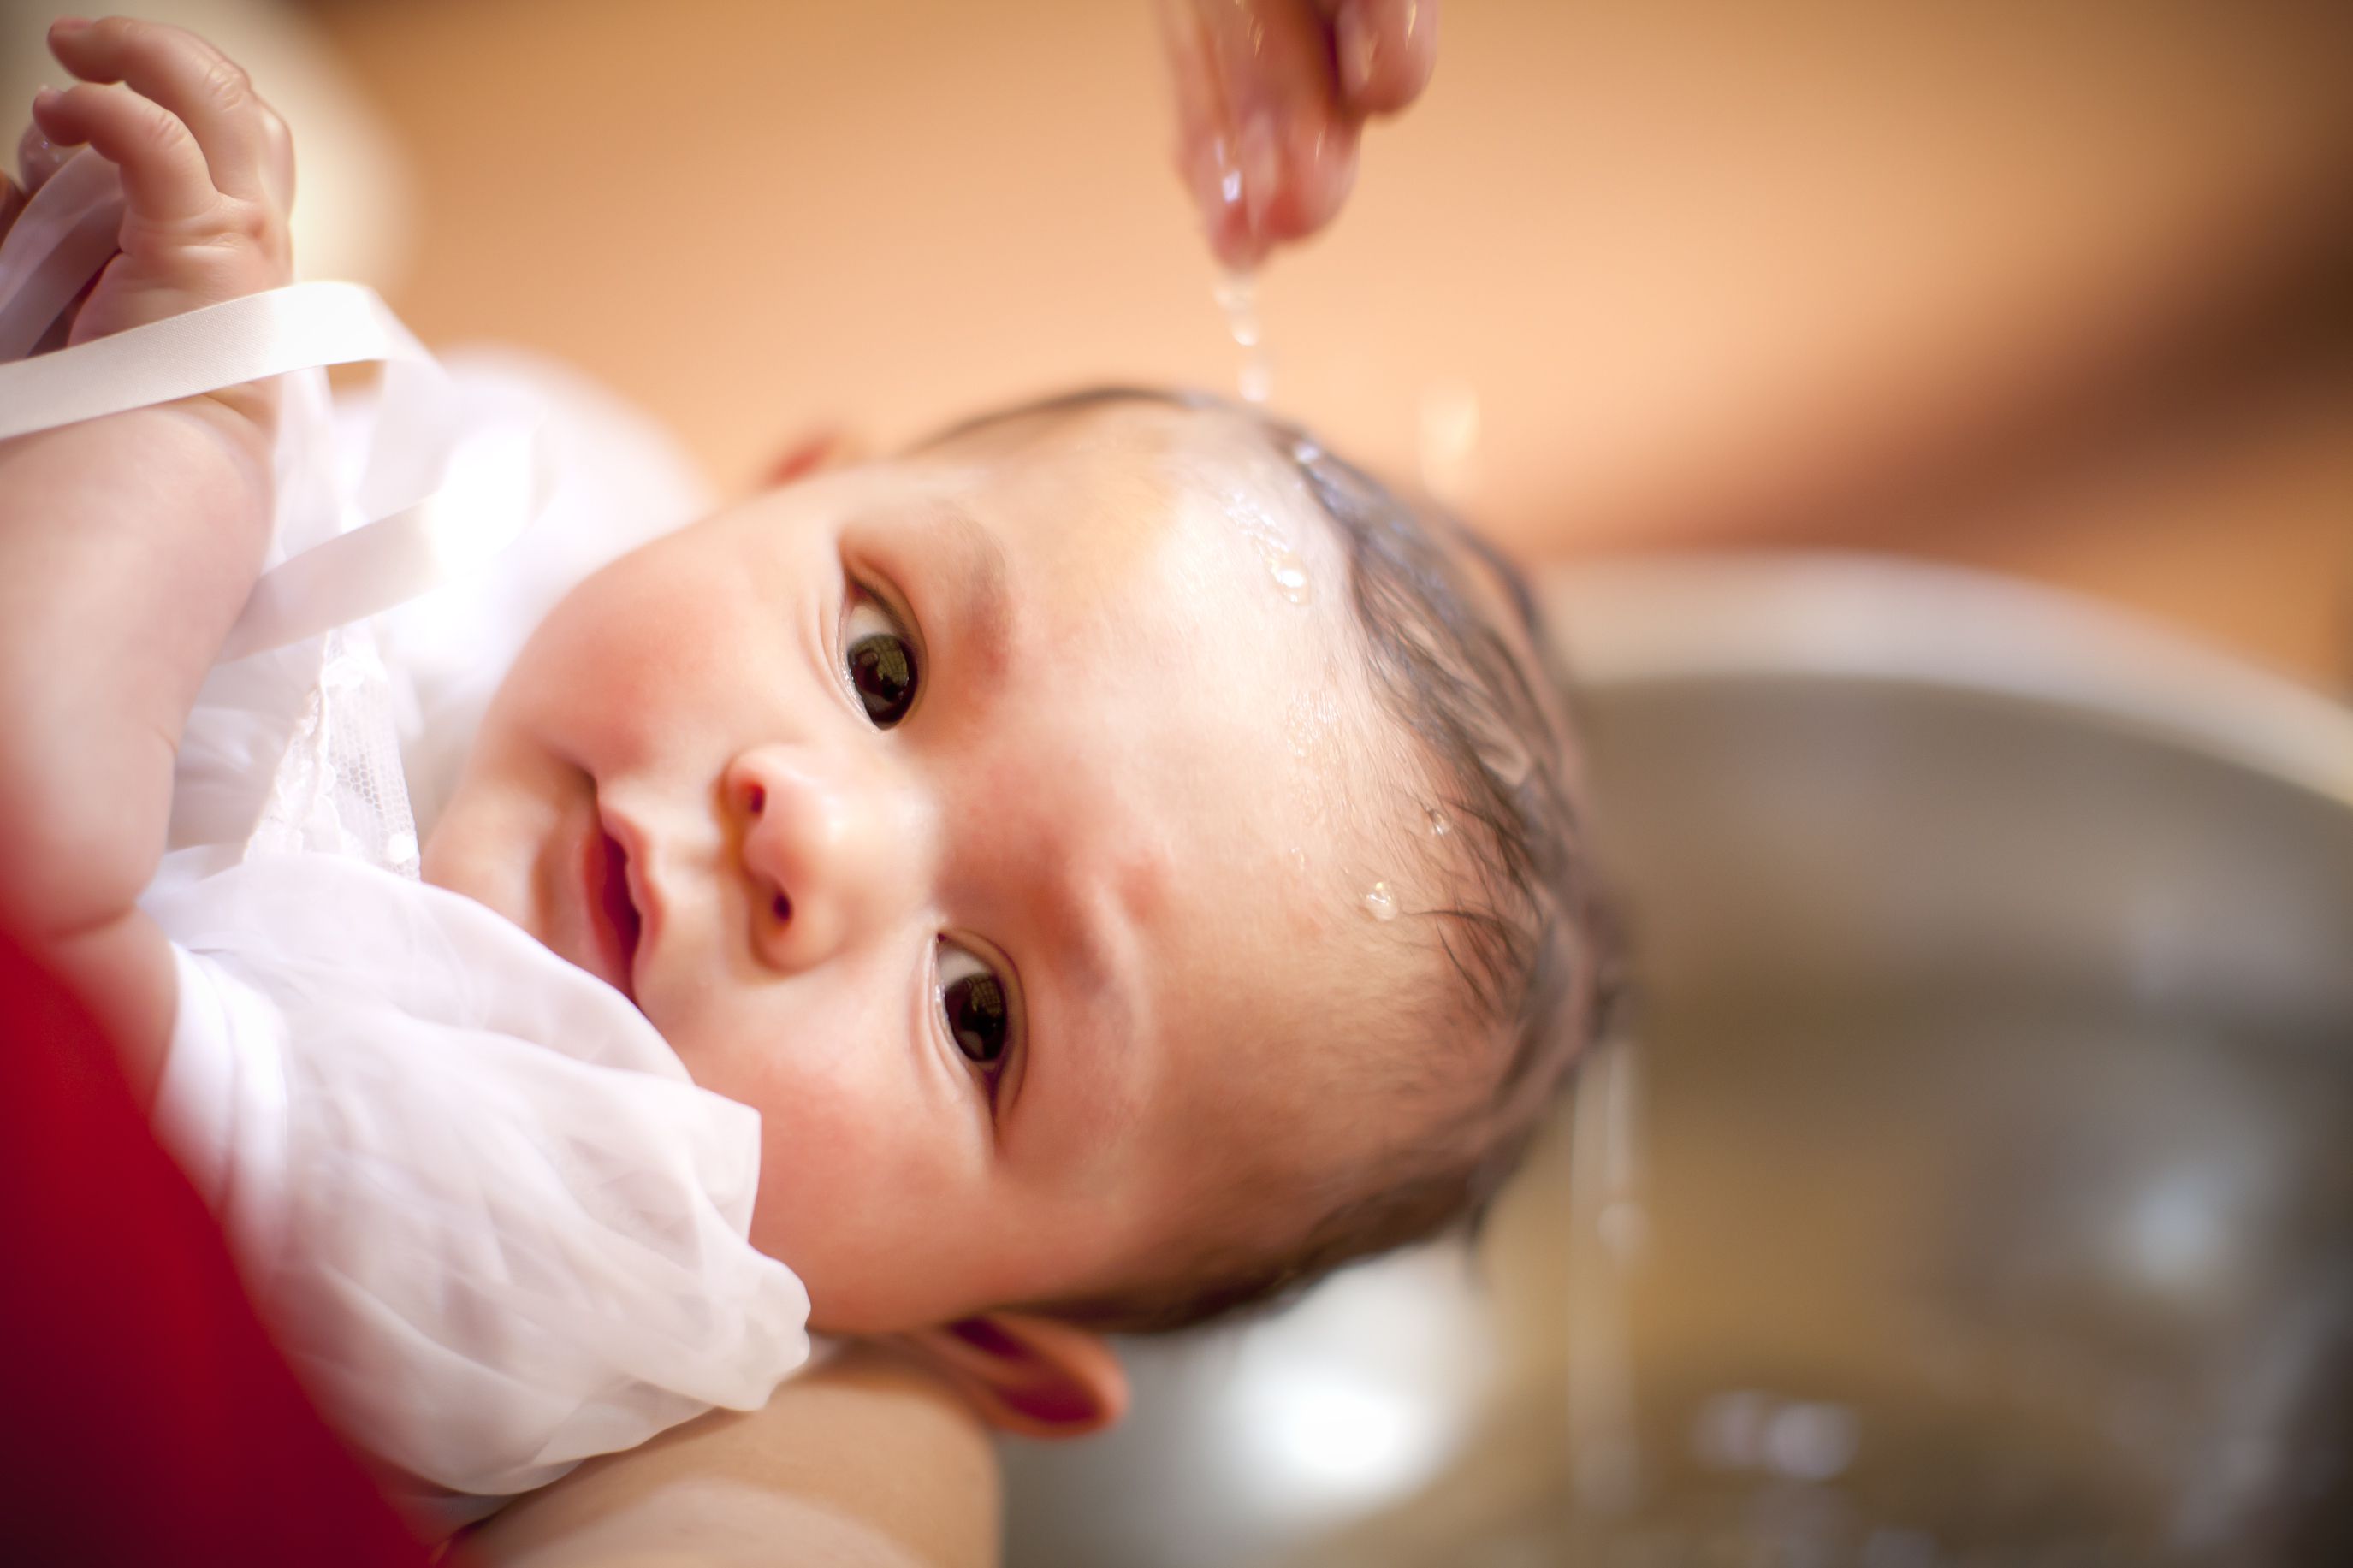 Etiquette Tips for a Child's Baptism or Christening